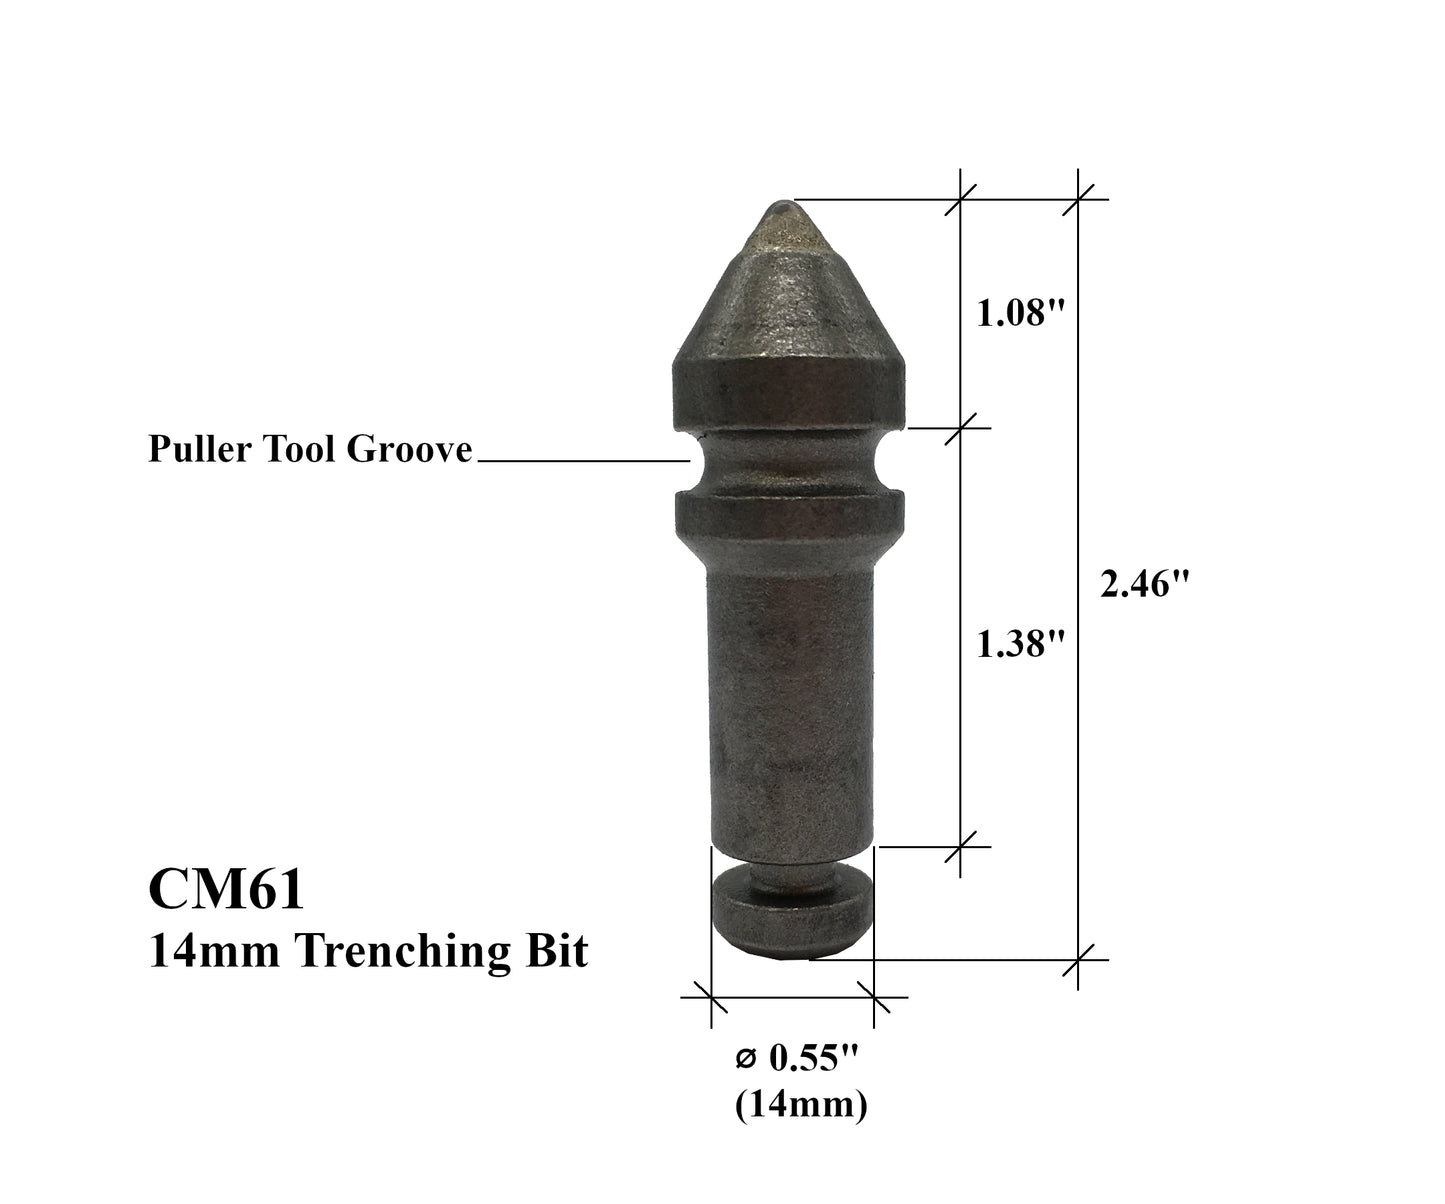 Small Trencher, Auger, Rotating Rock Bit, 14mm(0.55"Ø) Shank w/ C-Clip